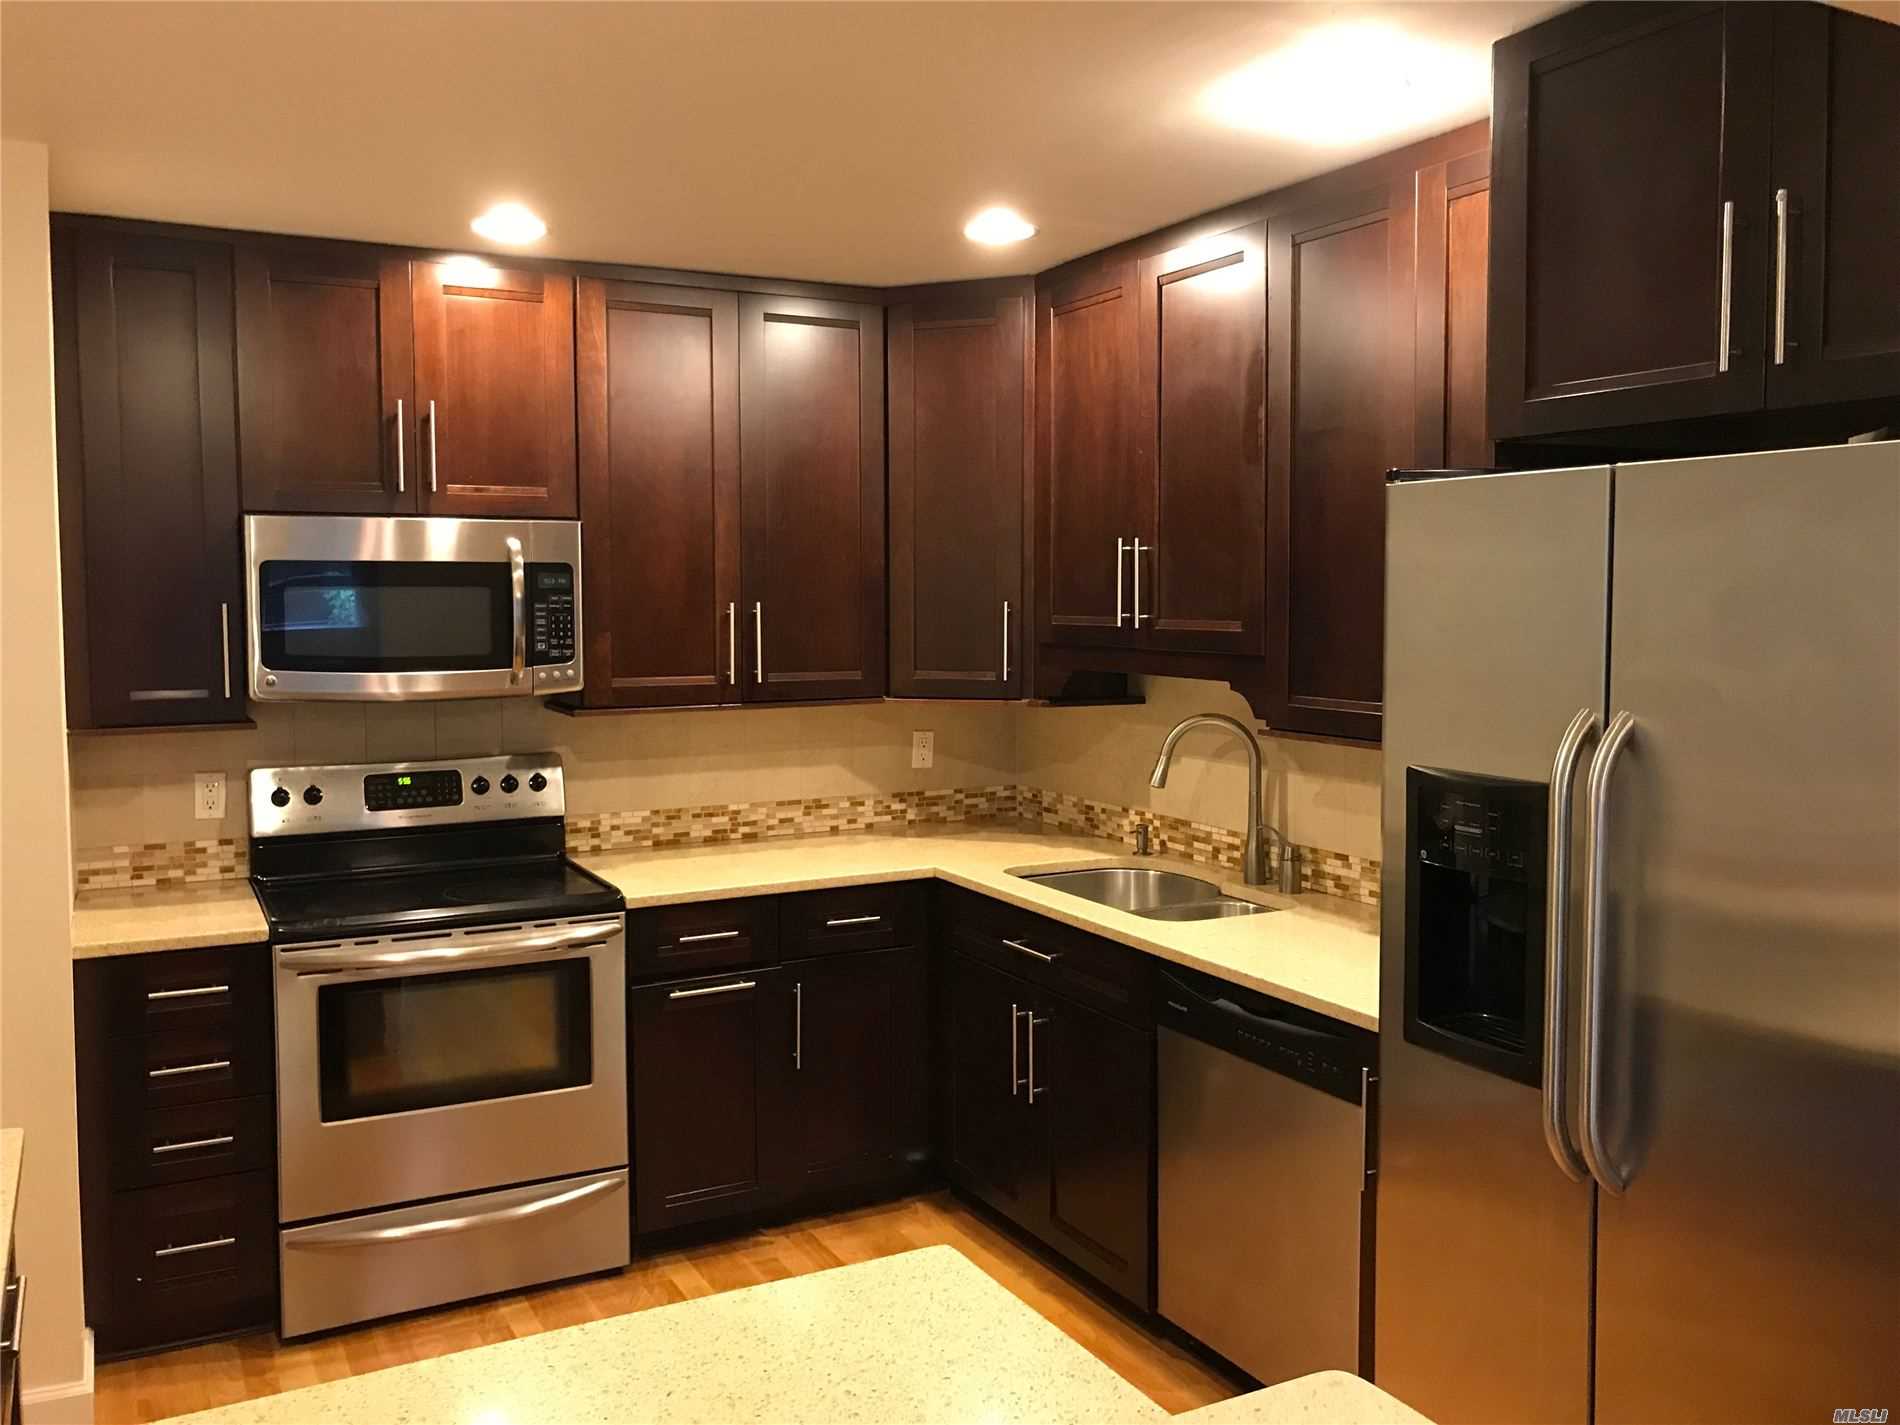 Sunny and Spacious 1 Bedroom Apartment in Bayside Features Living Room, 1 Full Bath, An Eat-In-Kitchen with Stainless Steel Appliances and Granite Counter Tops, Lots of Cabinet Space, Hardwood, Tile and Carpeting. Ample Street Parking. Close To All.